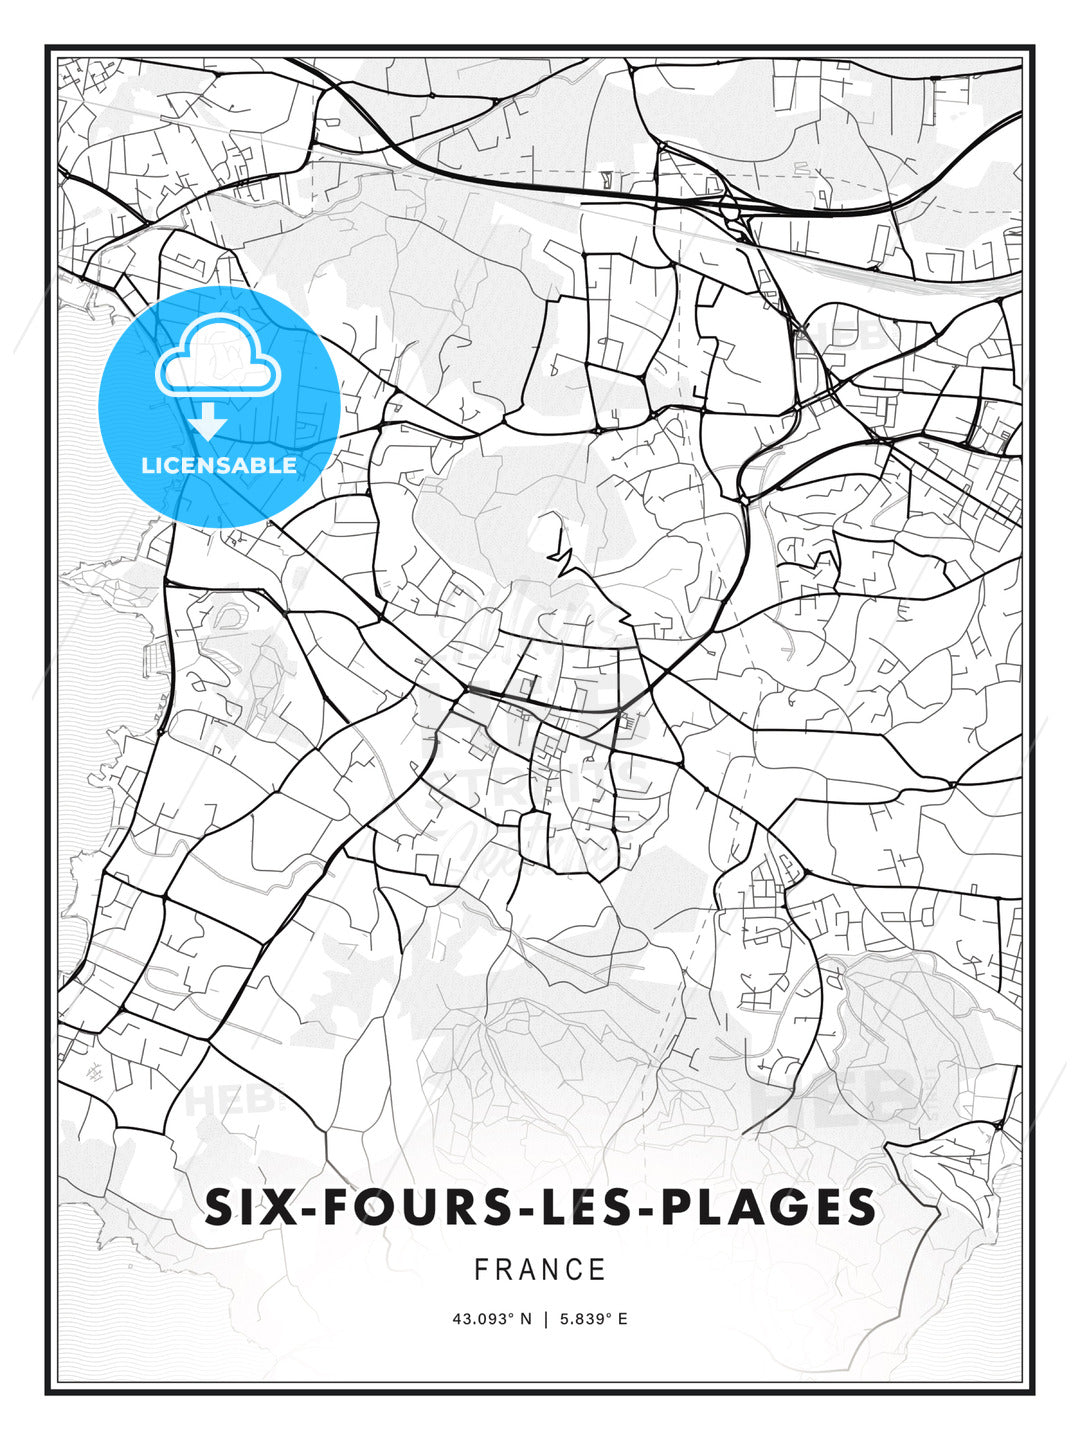 Six-Fours-les-Plages, France, Modern Print Template in Various Formats - HEBSTREITS Sketches